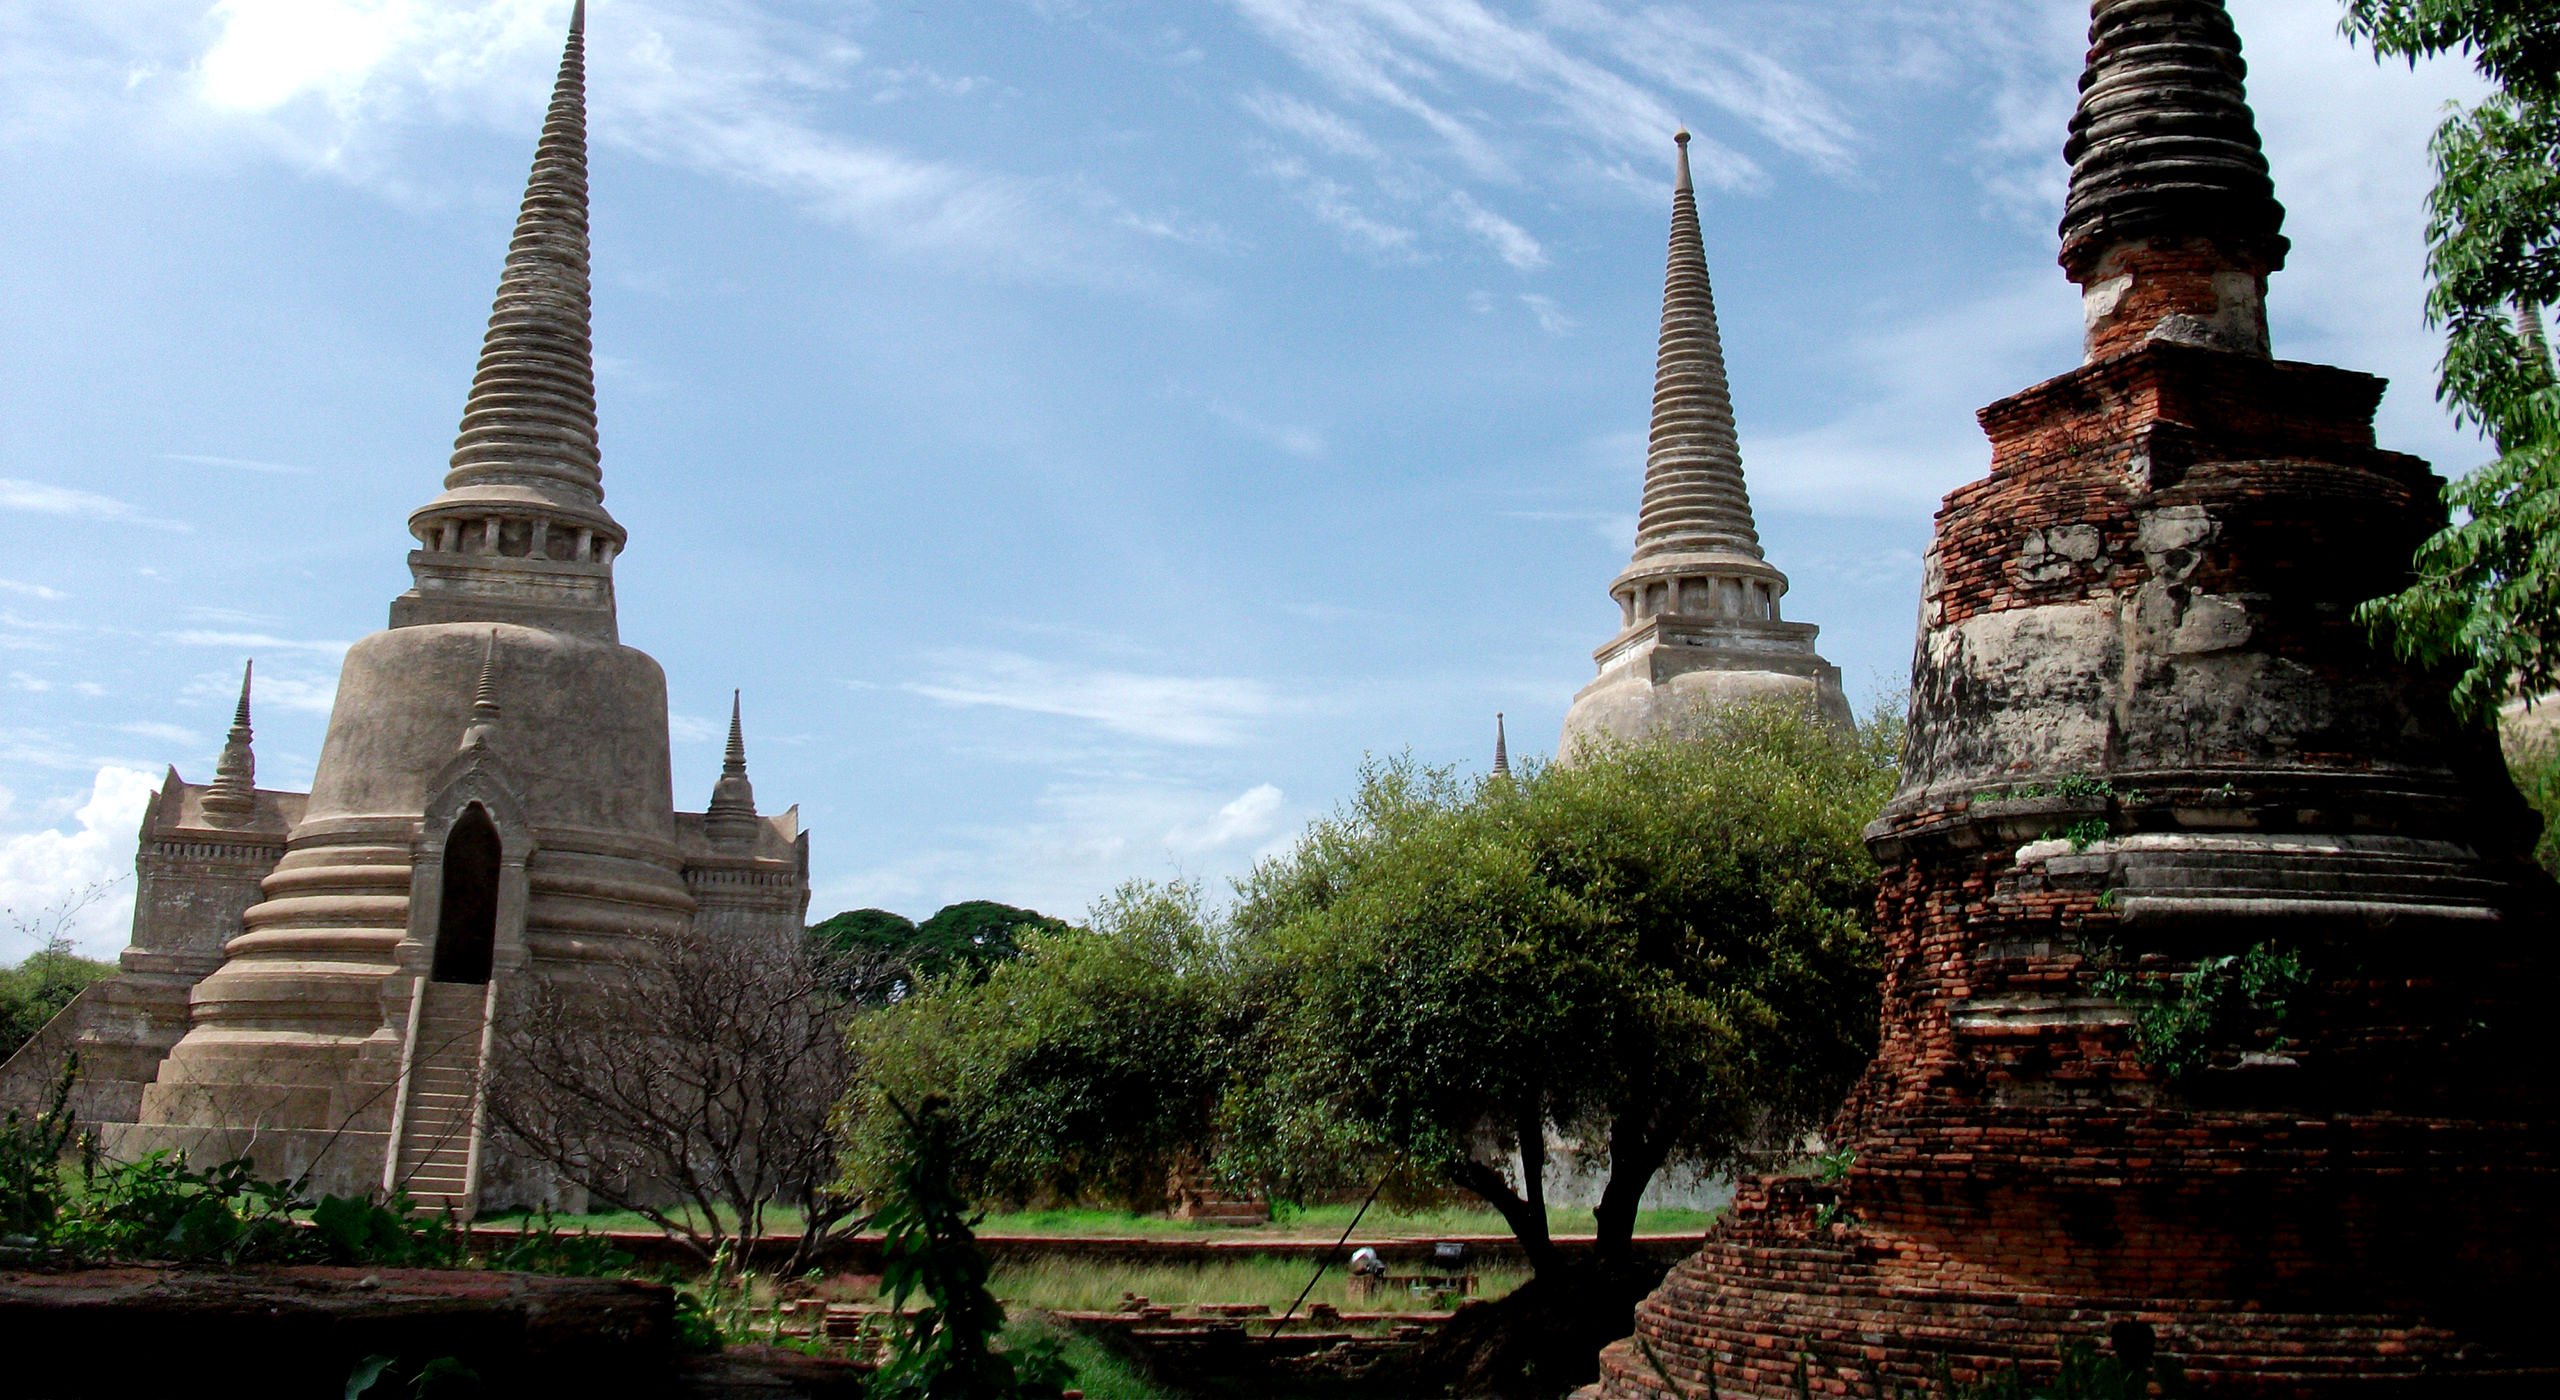 The Lost Temples of Ayutthaya